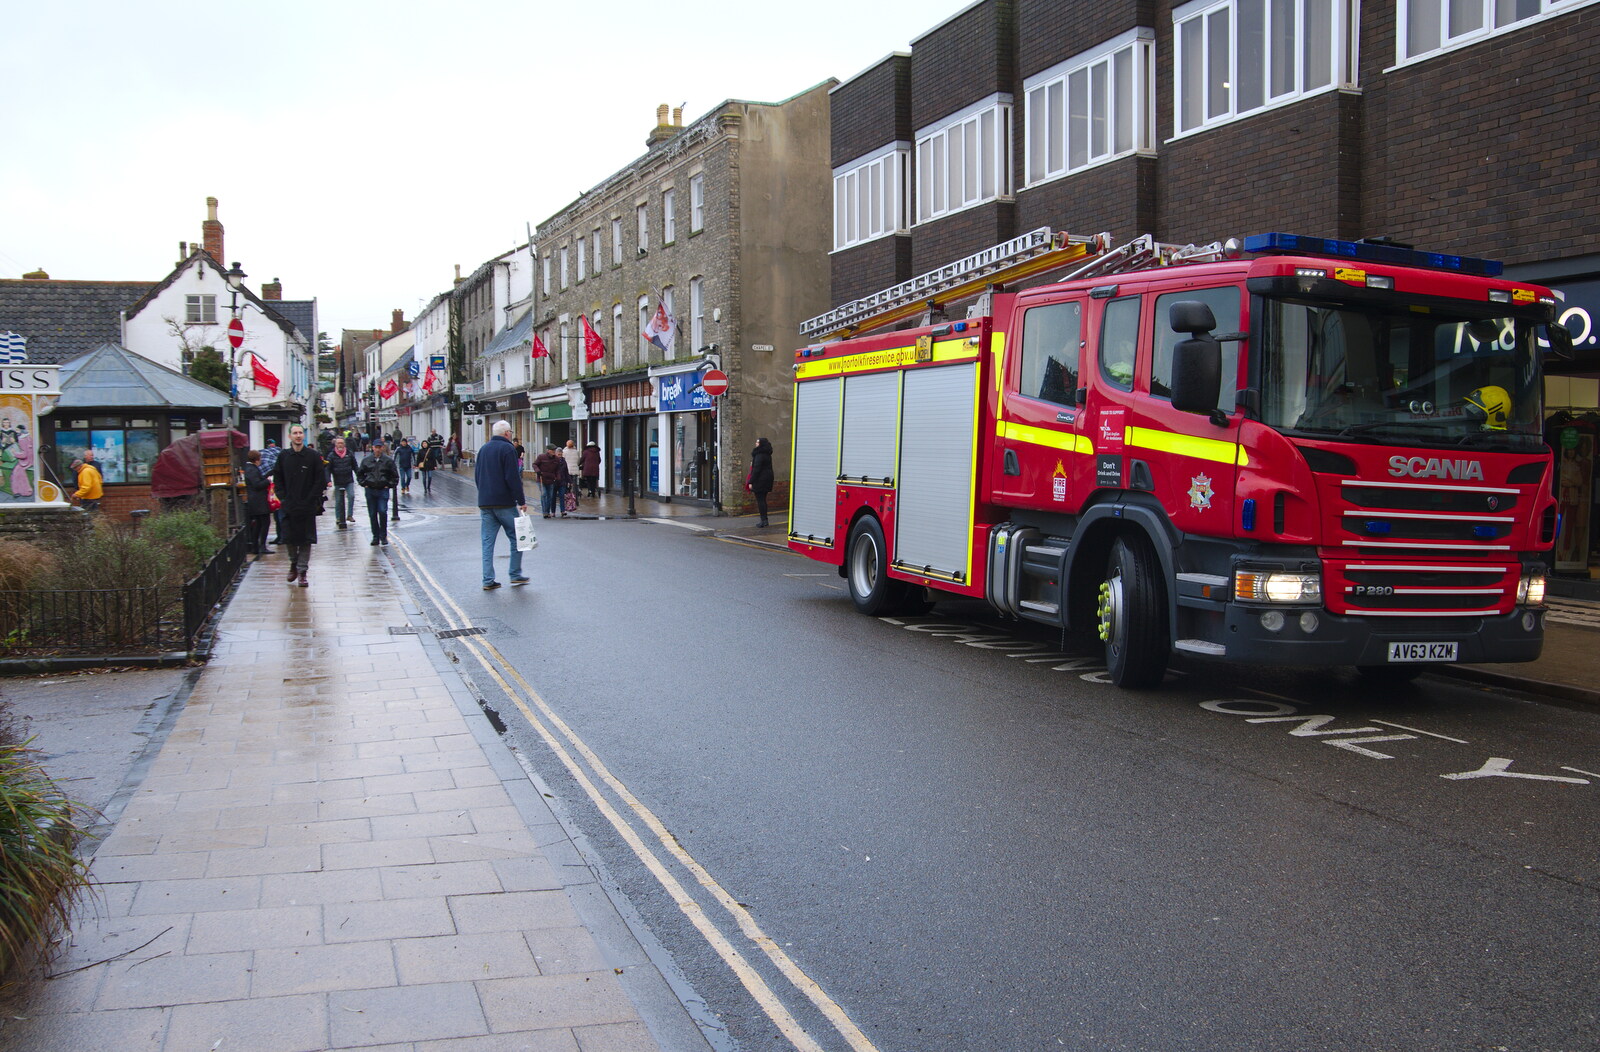 There's a fire engine on Mere Street from A Christingle Service, St. Nicholas Church, Oakley, Suffolk - 24th December 2019